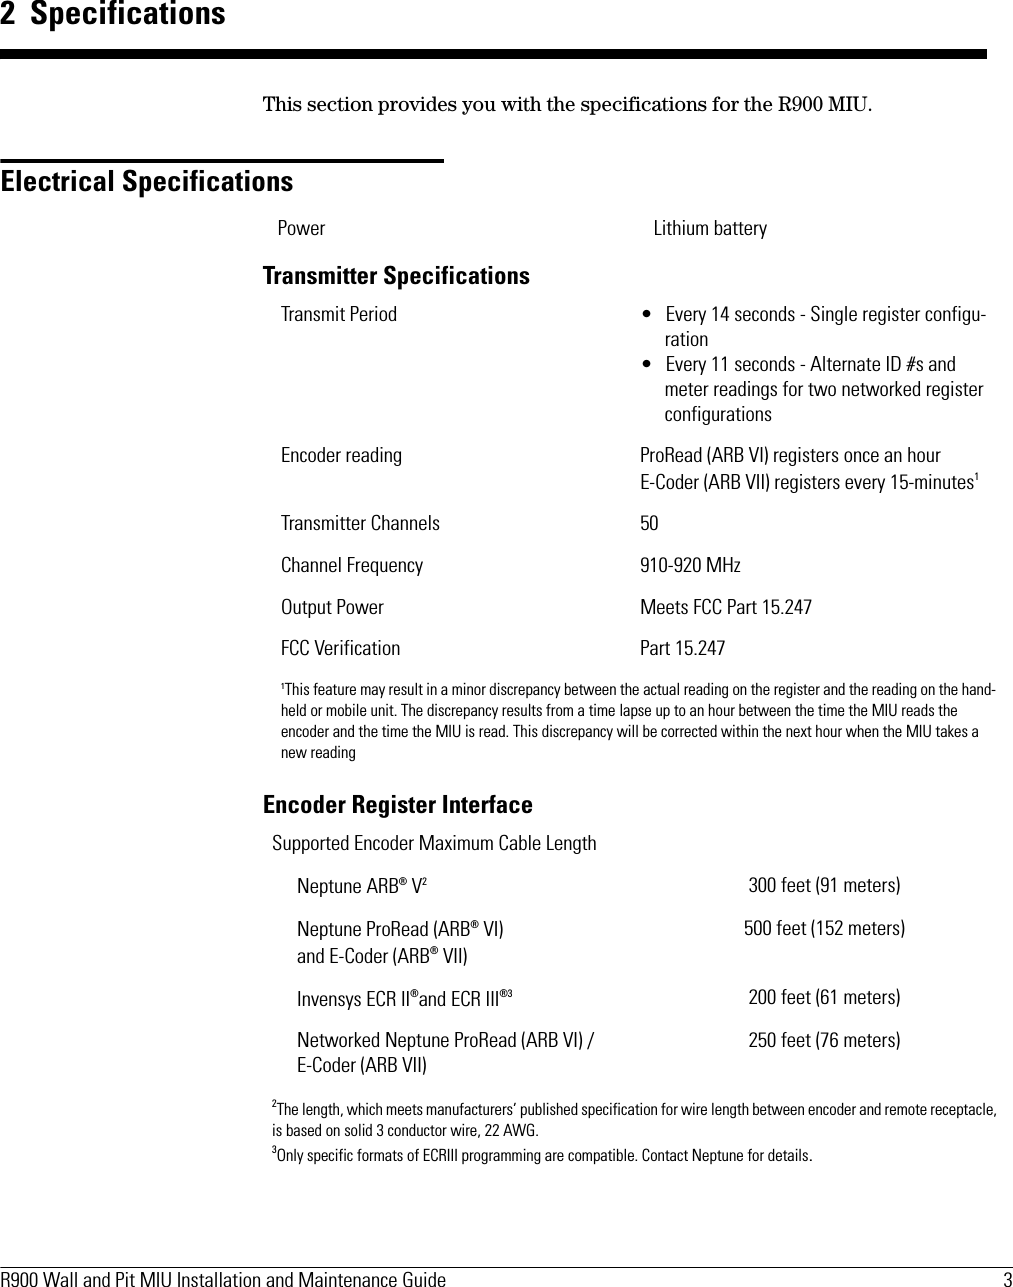 R900 Wall and Pit MIU Installation and Maintenance Guide  3 2  SpecificationsThis section provides you with the specifications for the R900 MIU. Electrical SpecificationsTransmitter SpecificationsEncoder Register InterfacePower Lithium batteryTransmit Period • Every 14 seconds - Single register configu-ration• Every 11 seconds - Alternate ID #s and meter readings for two networked register configurationsEncoder reading ProRead (ARB VI) registers once an hour E-Coder (ARB VII) registers every 15-minutes1Transmitter Channels 50Channel Frequency 910-920 MHzOutput Power Meets FCC Part 15.247FCC Verification Part 15.2471This feature may result in a minor discrepancy between the actual reading on the register and the reading on the hand-held or mobile unit. The discrepancy results from a time lapse up to an hour between the time the MIU reads the encoder and the time the MIU is read. This discrepancy will be corrected within the next hour when the MIU takes a new readingSupported Encoder Maximum Cable LengthNeptune ARB® V2300 feet (91 meters)Neptune ProRead (ARB® VI)and E-Coder (ARB® VII)500 feet (152 meters)Invensys ECR II®and ECR III®3 200 feet (61 meters)Networked Neptune ProRead (ARB VI) /E-Coder (ARB VII) 250 feet (76 meters)2The length, which meets manufacturers’ published specification for wire length between encoder and remote receptacle, is based on solid 3 conductor wire, 22 AWG.3Only specific formats of ECRIII programming are compatible. Contact Neptune for details.